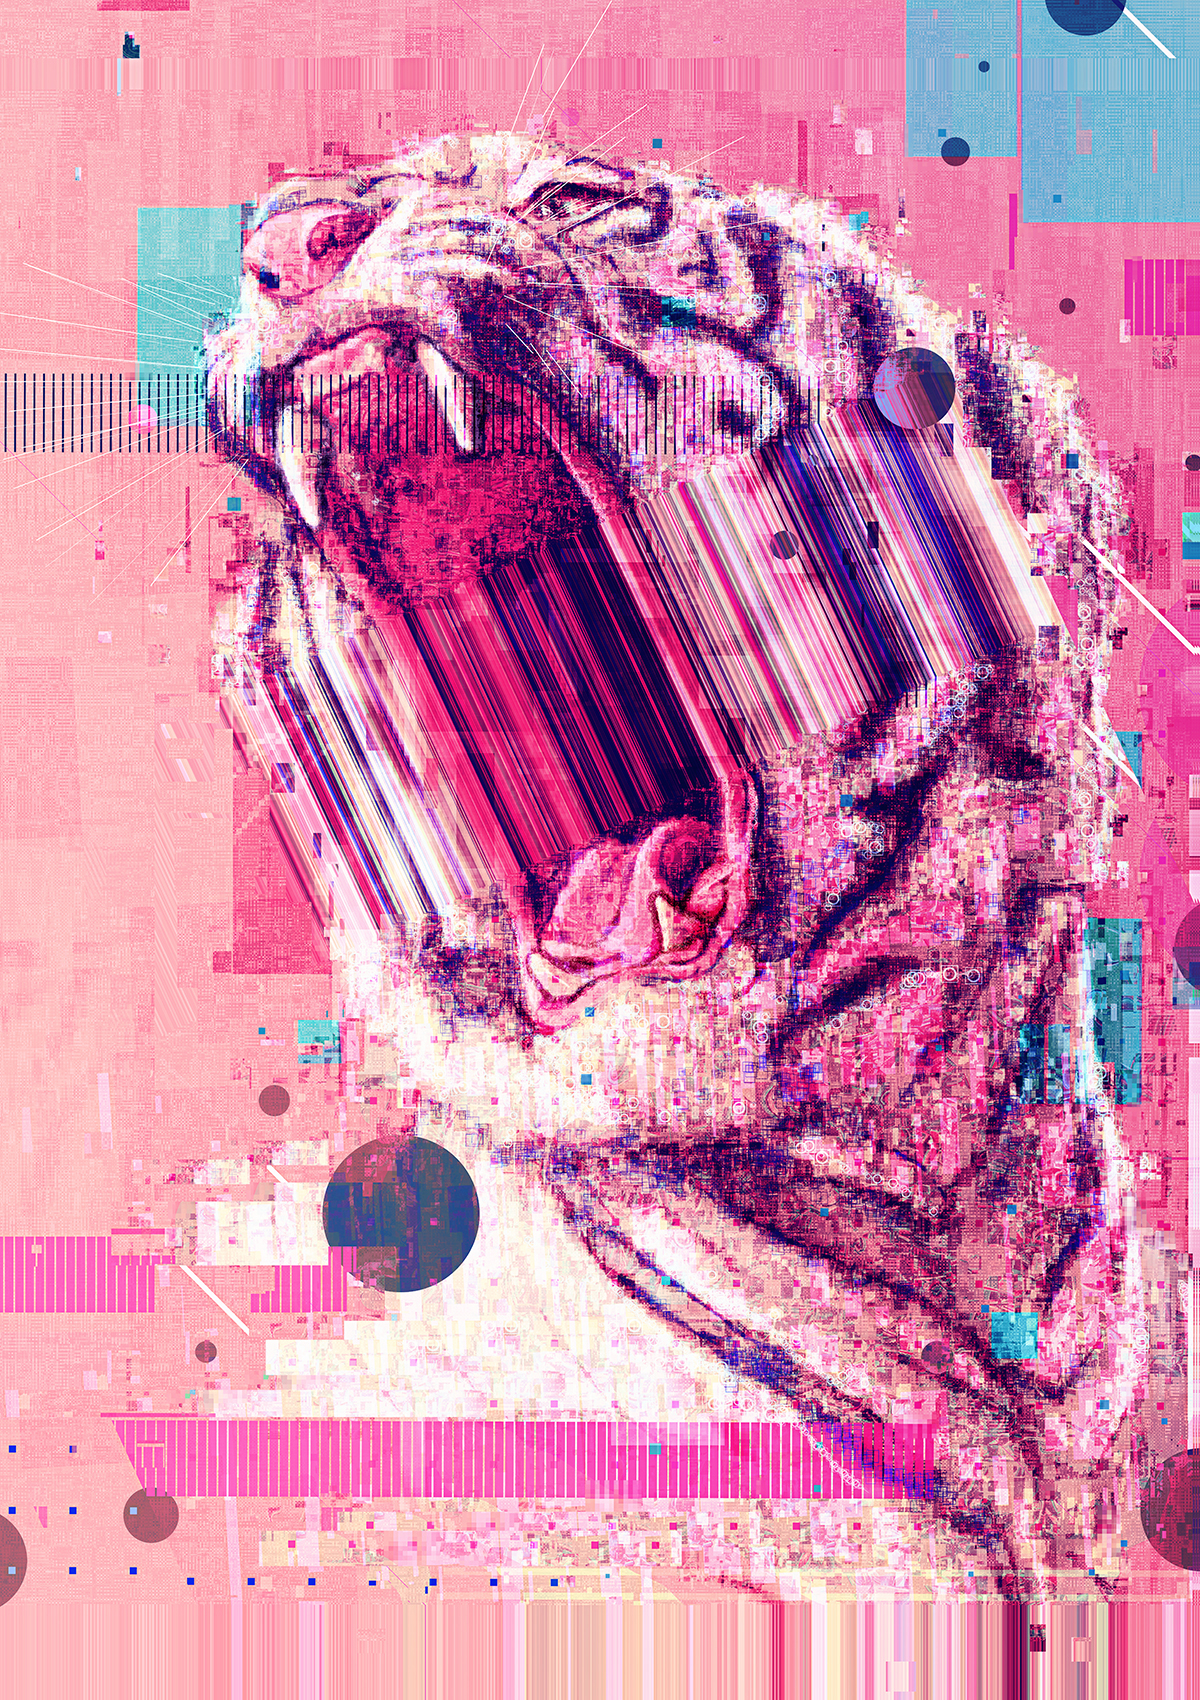 Ps25Under25 digital decade Glitch glitchart tiger White animal poster vector shapes pink raw MakeItNYC